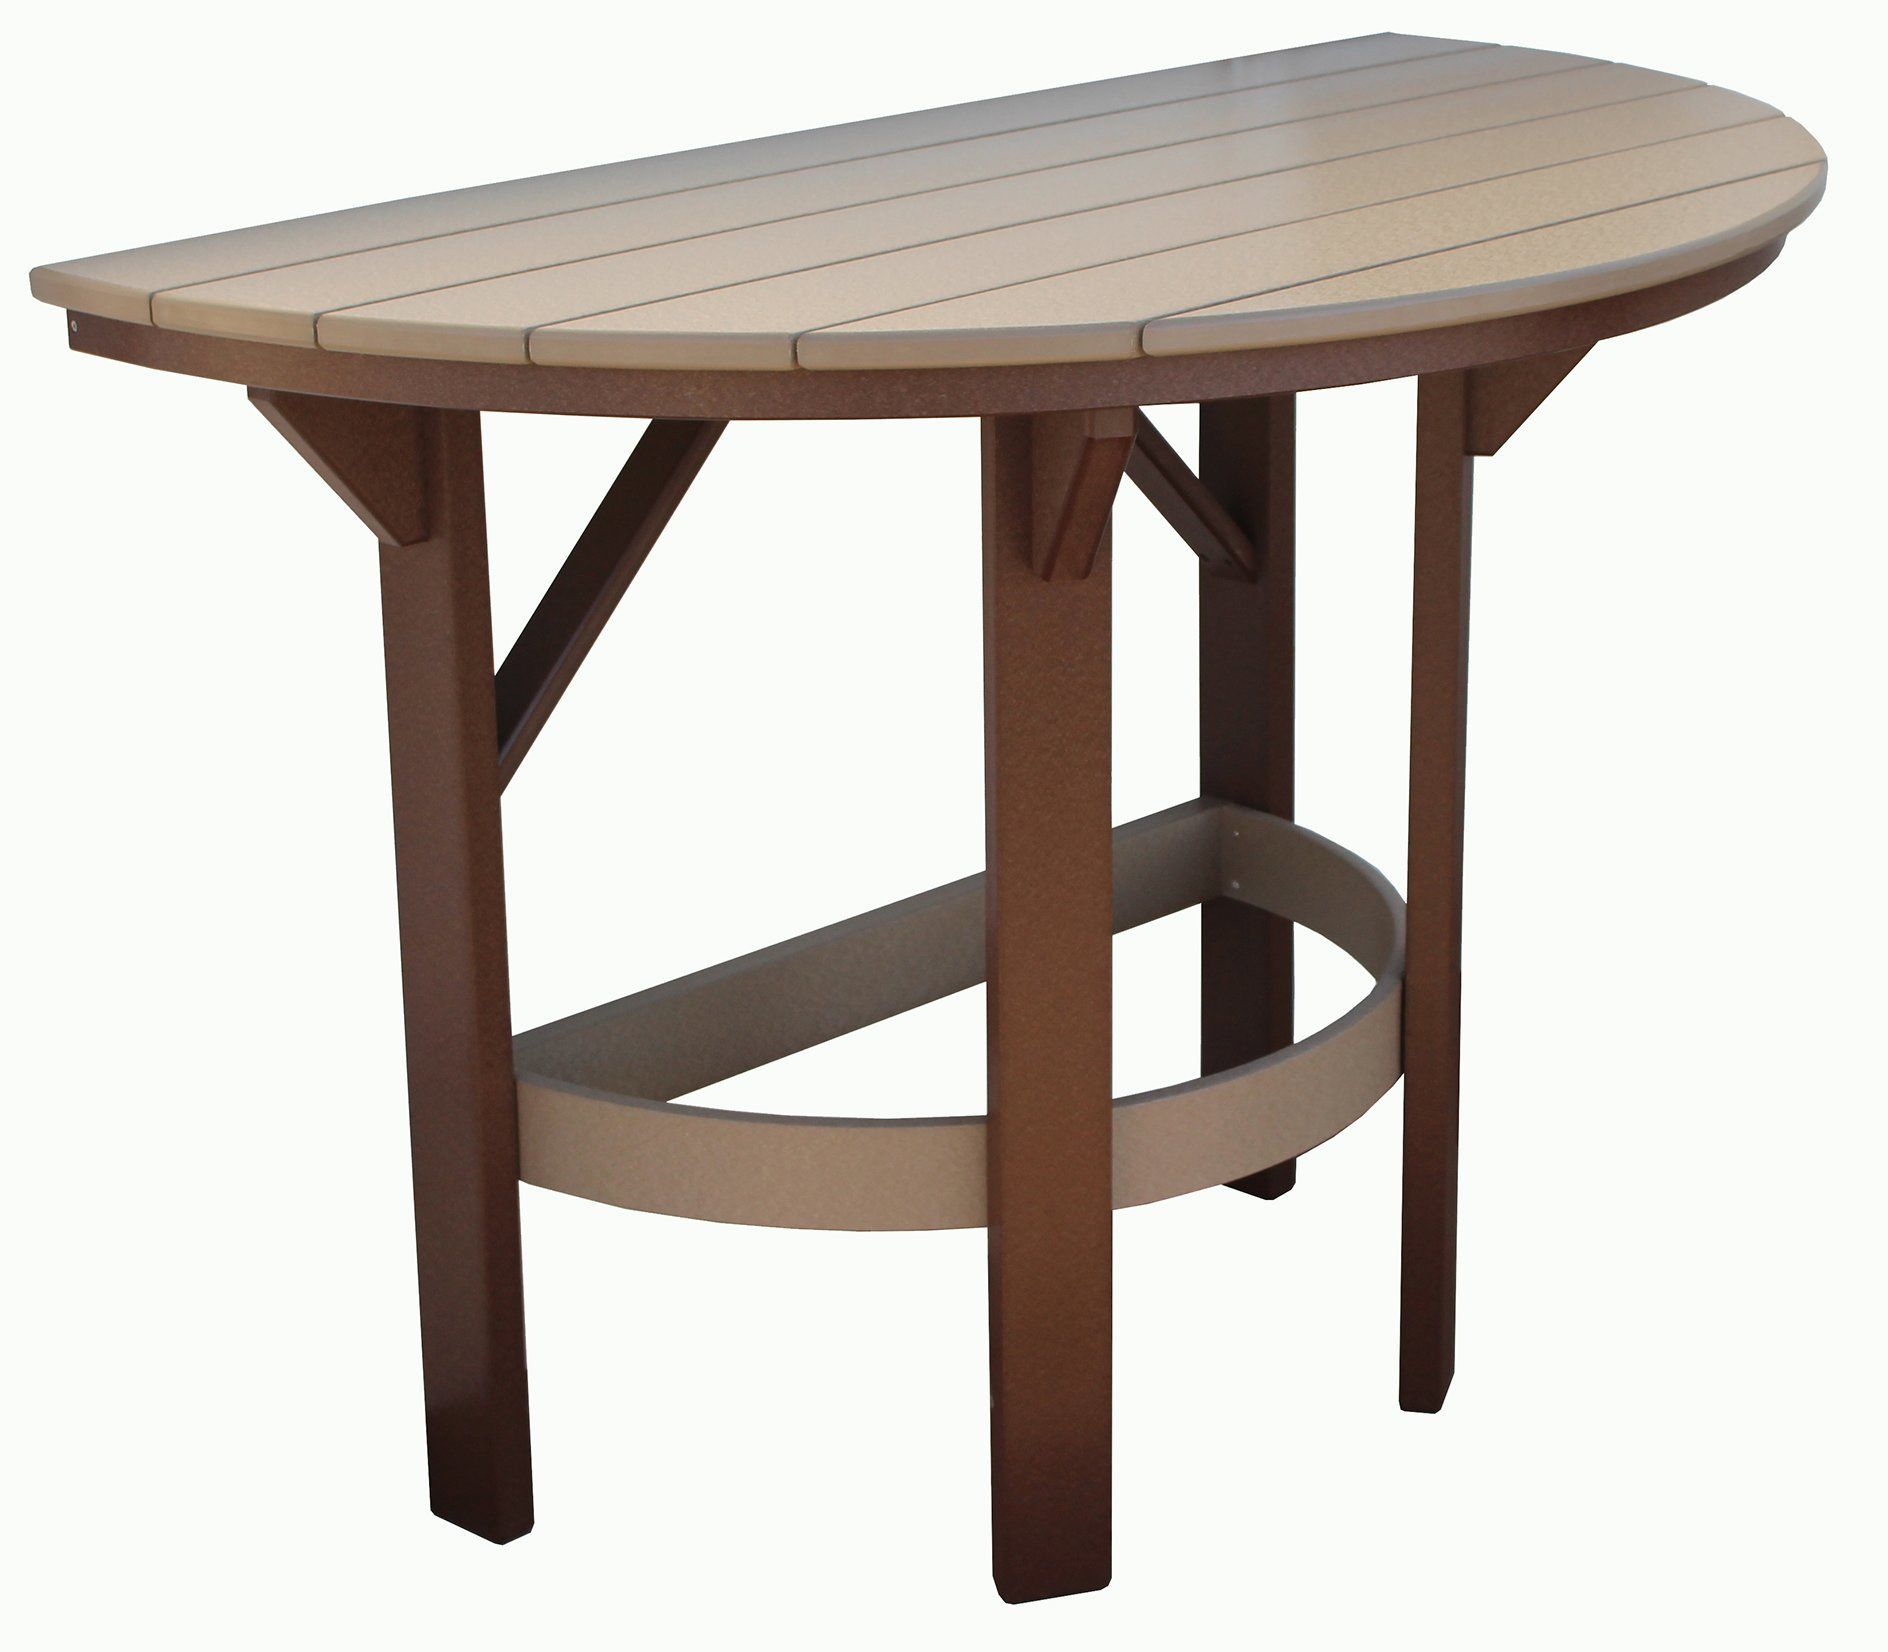 Seaside 60" Half Round Poly Dining Table From Dutchcrafters Amish With Regard To Outdoor Half Round Coffee Tables (View 4 of 15)